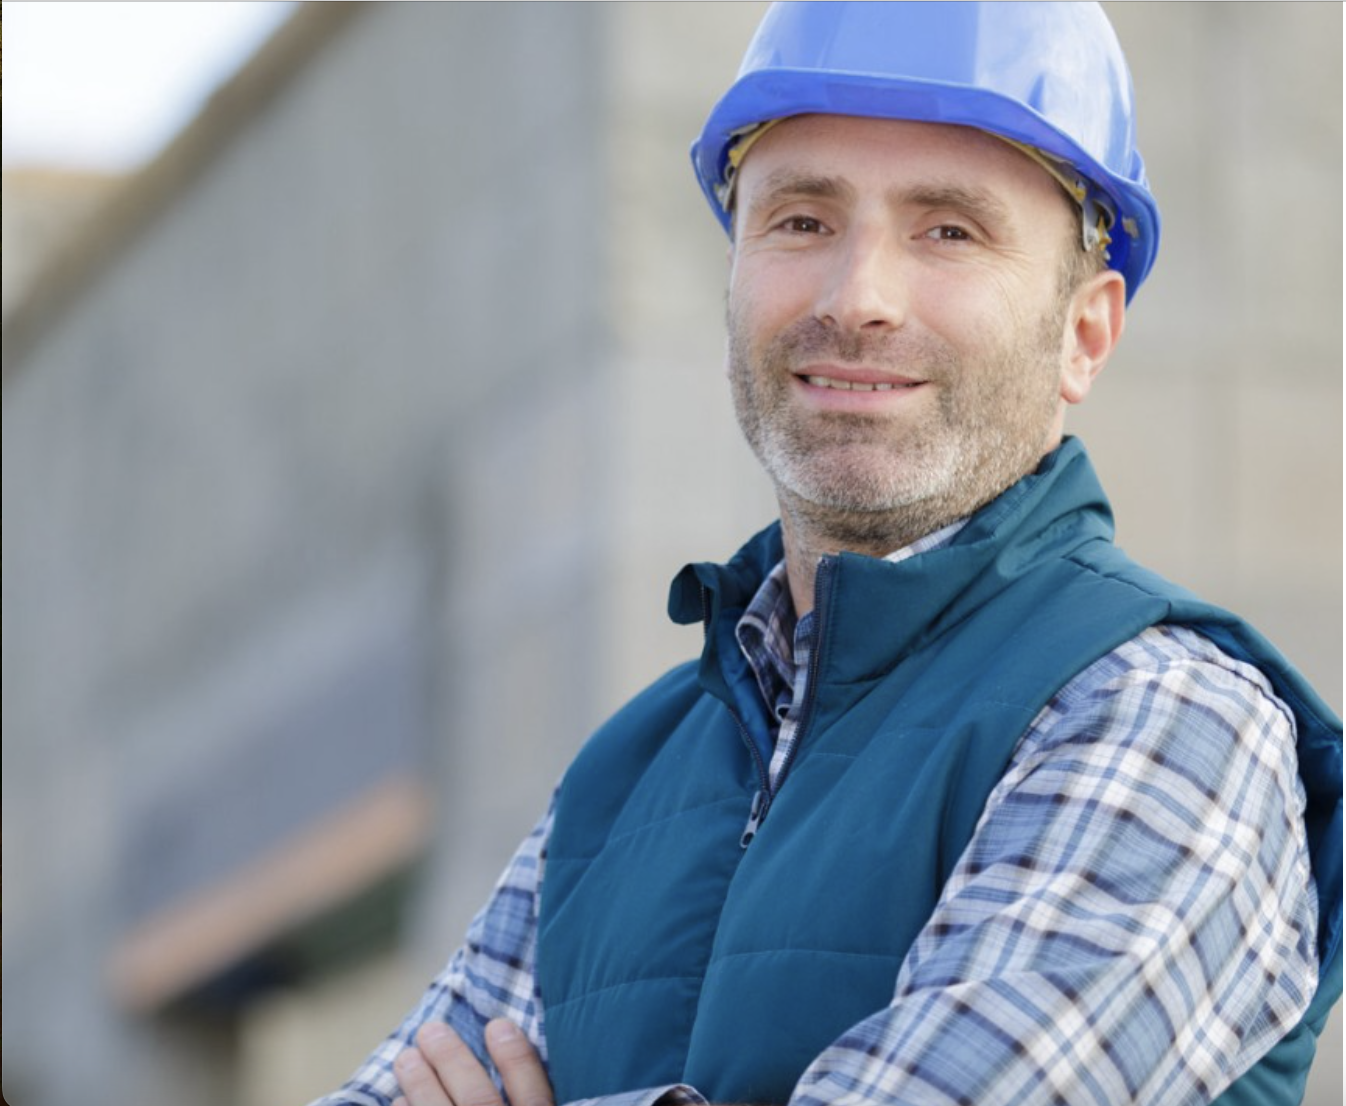 a man wearing a blue hard hat and vest